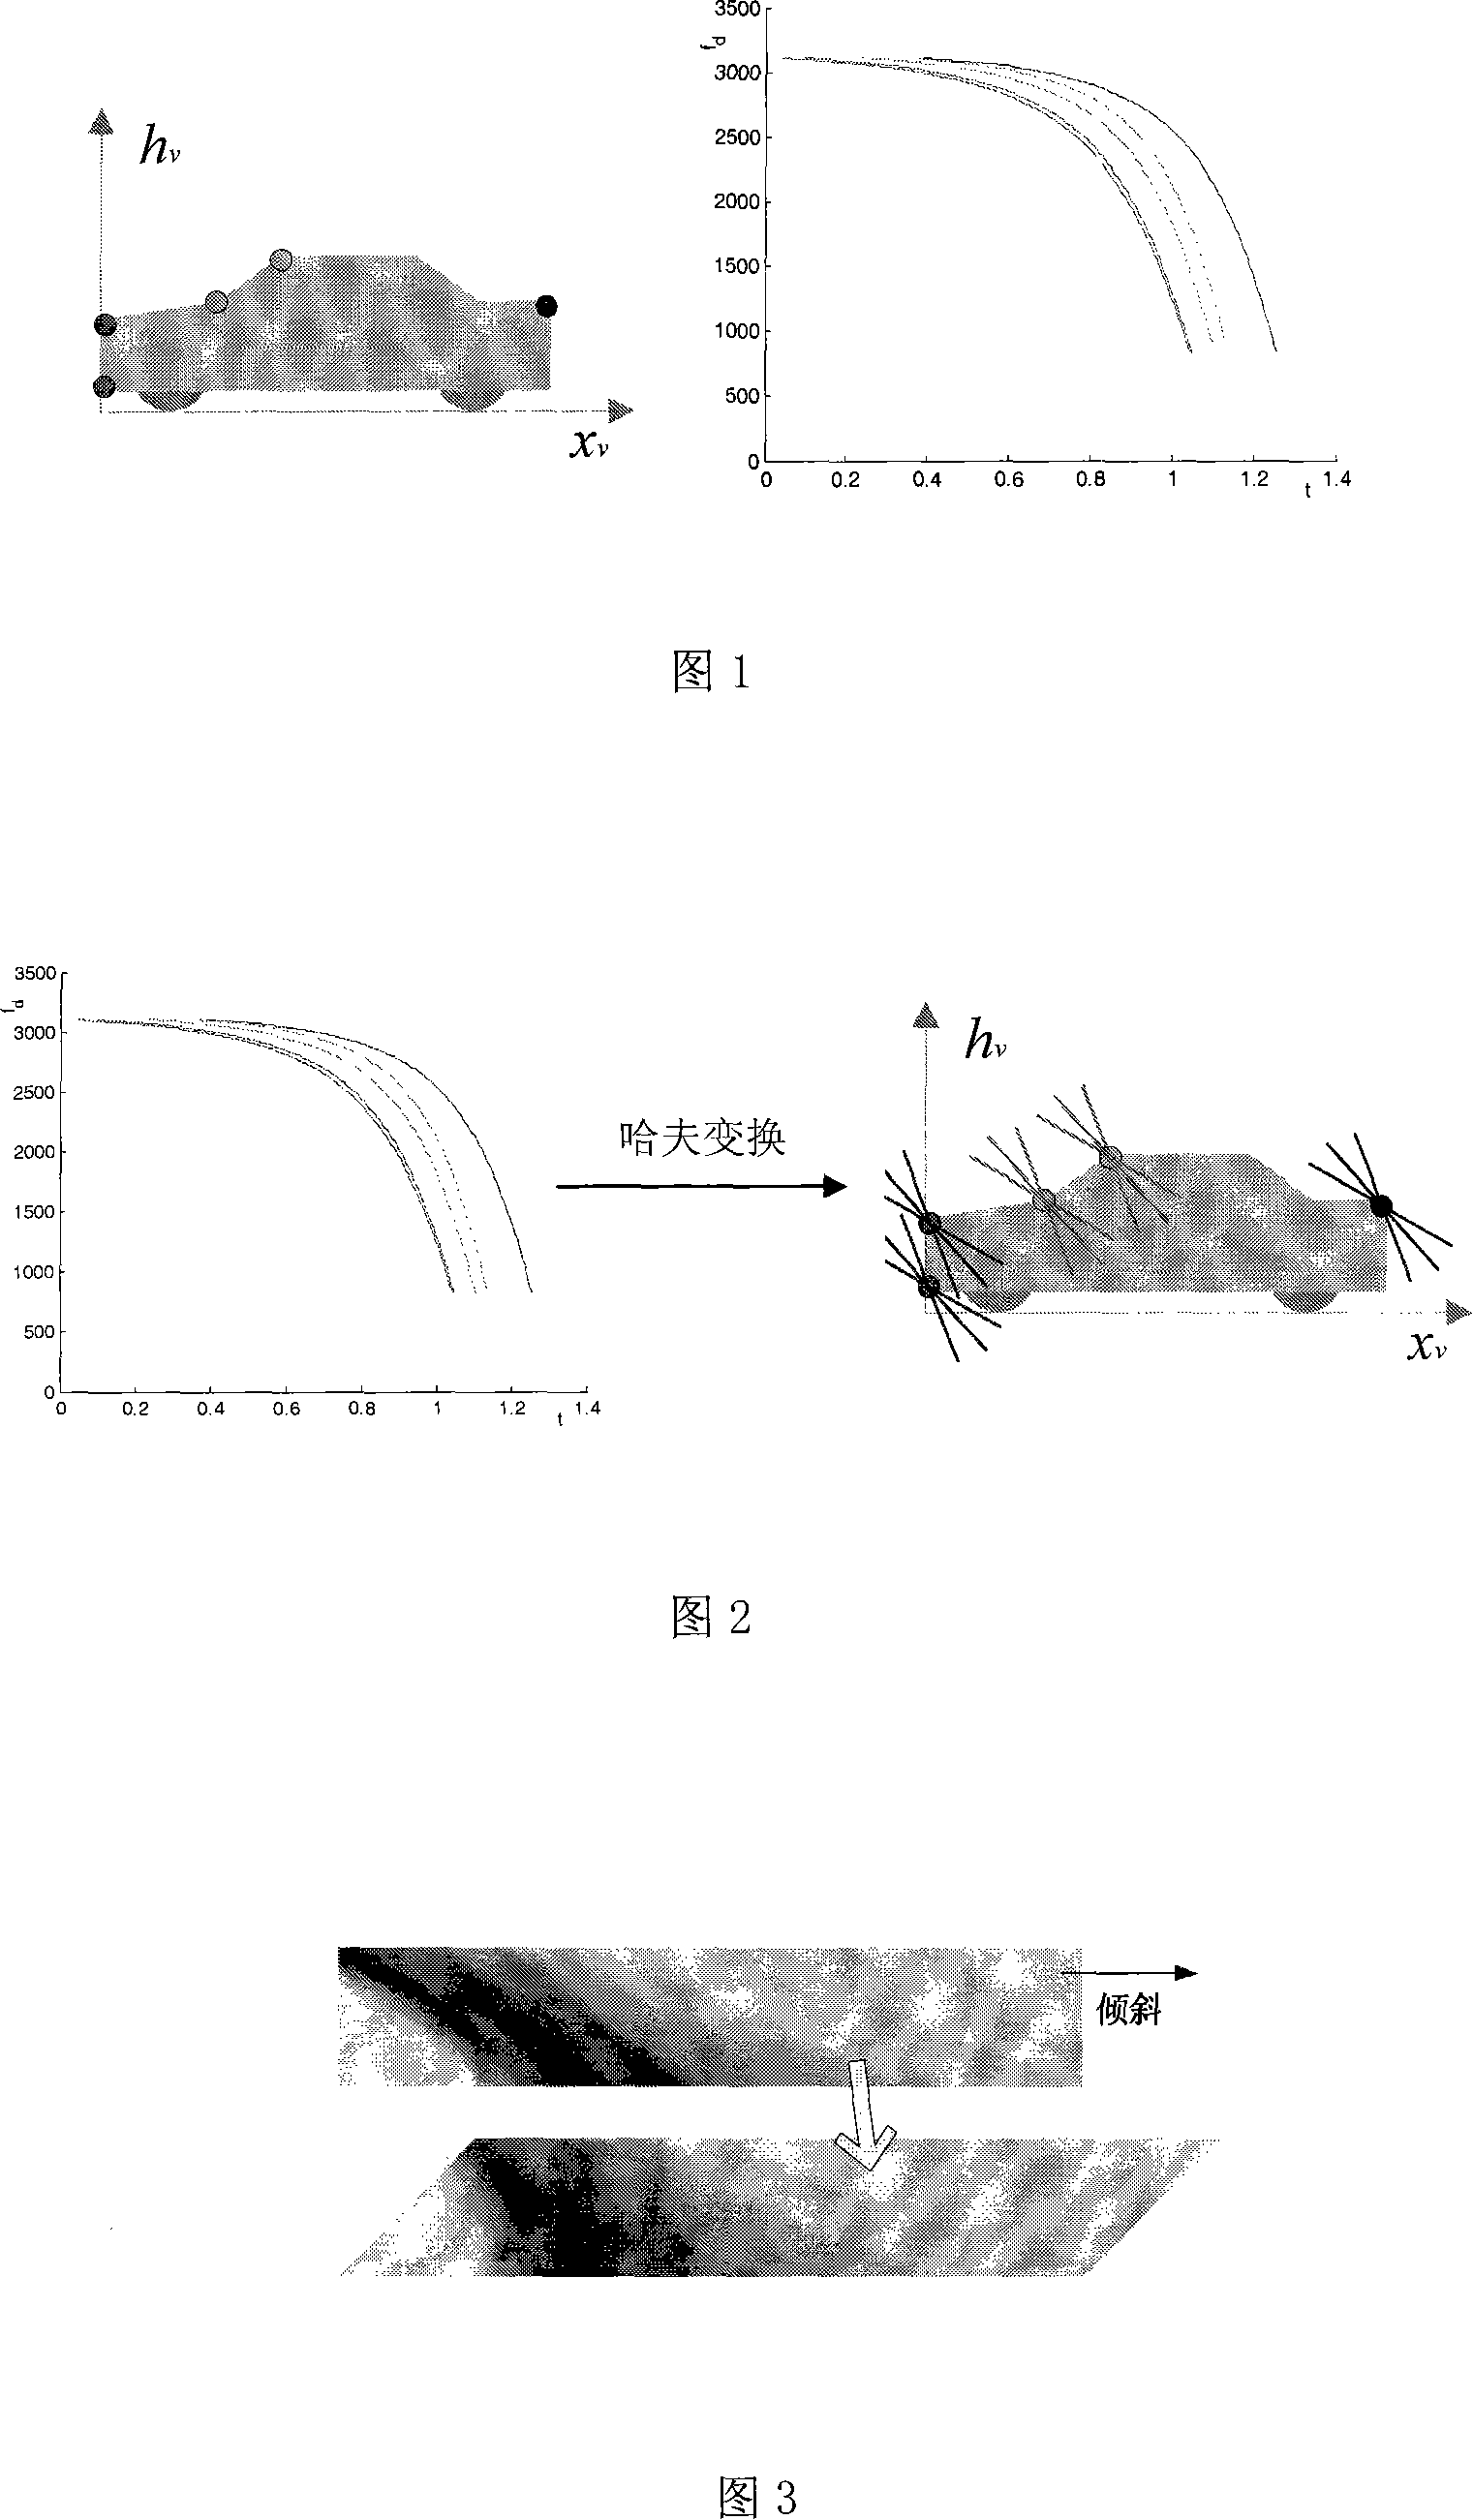 Vehicle type classification method based on single frequency continuous-wave radar